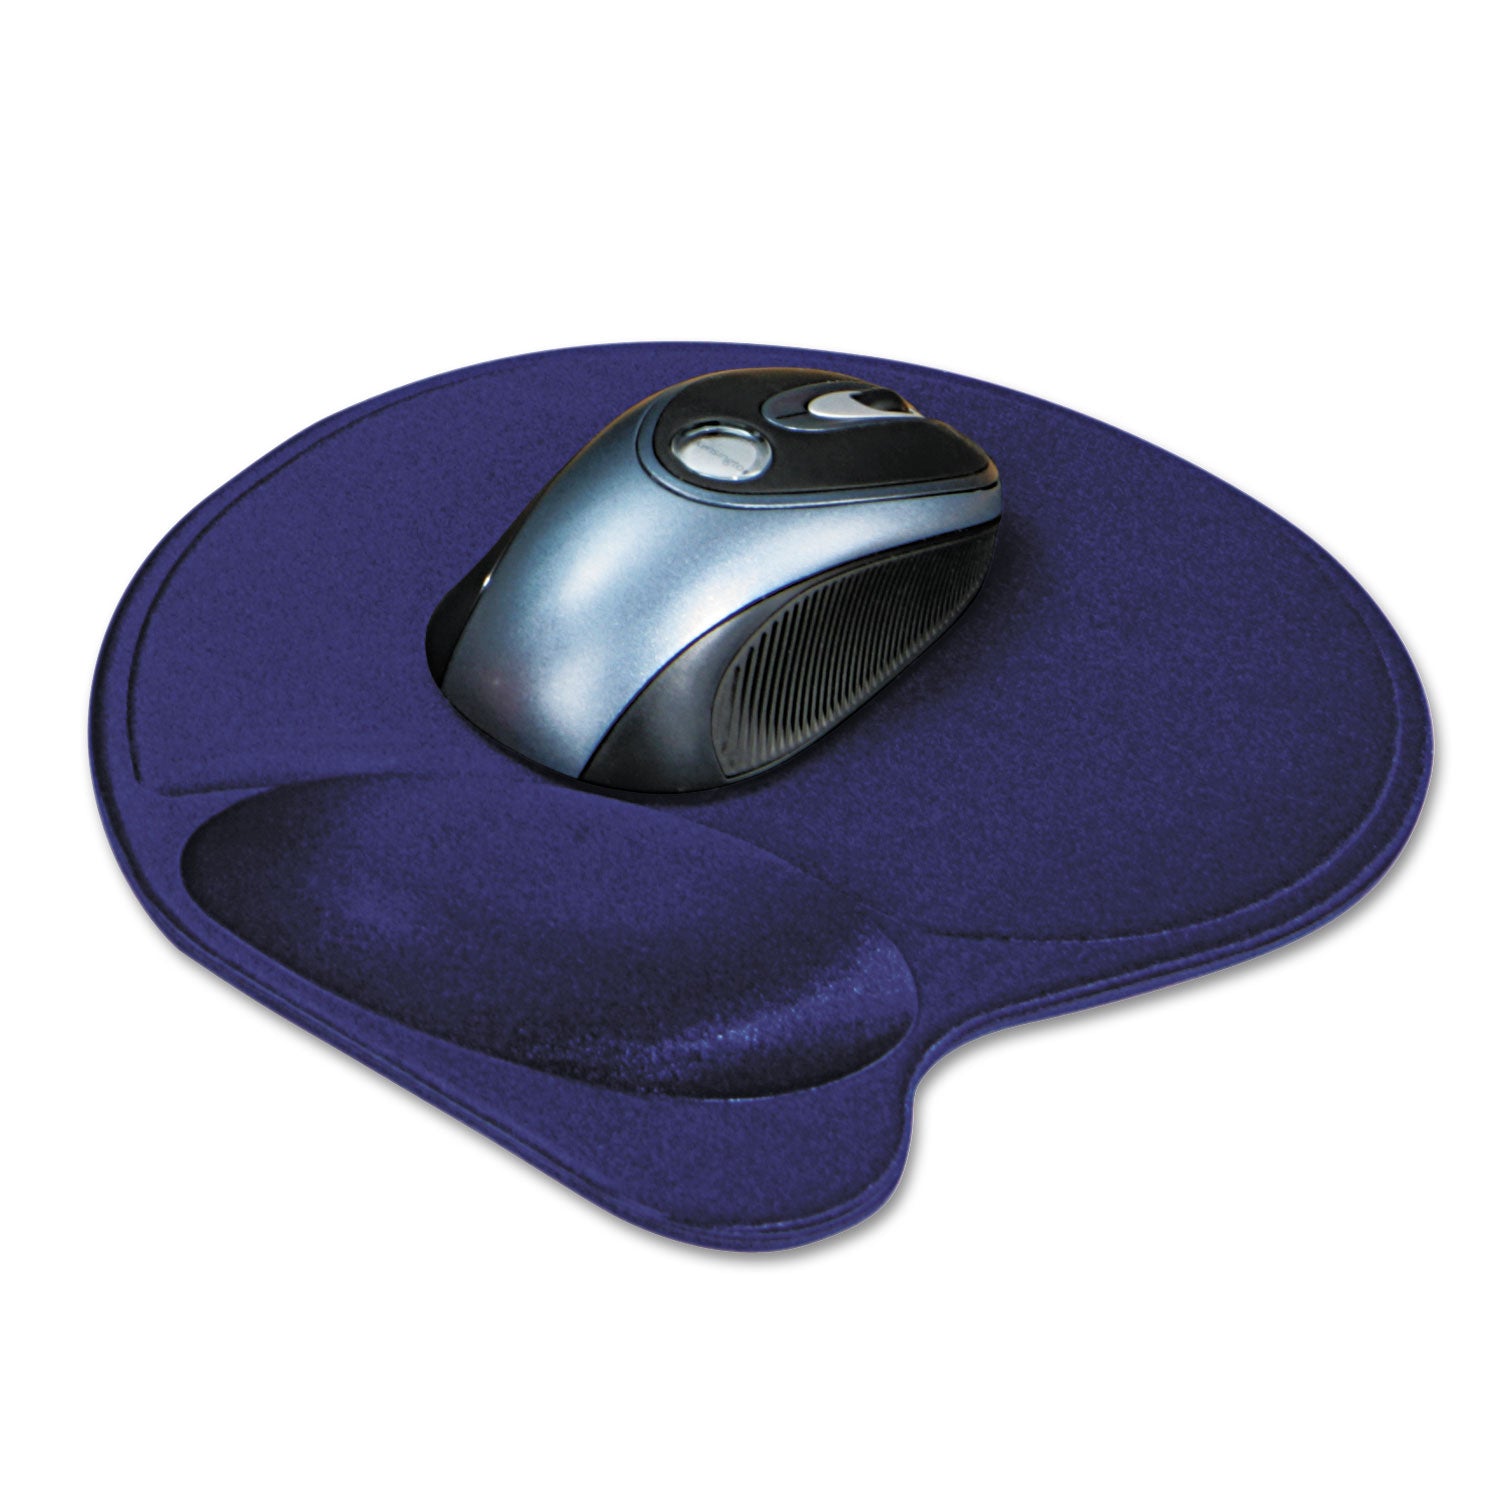 Wrist Pillow Extra-Cushioned Mouse Support, 7.9 x 10.9, Blue - 